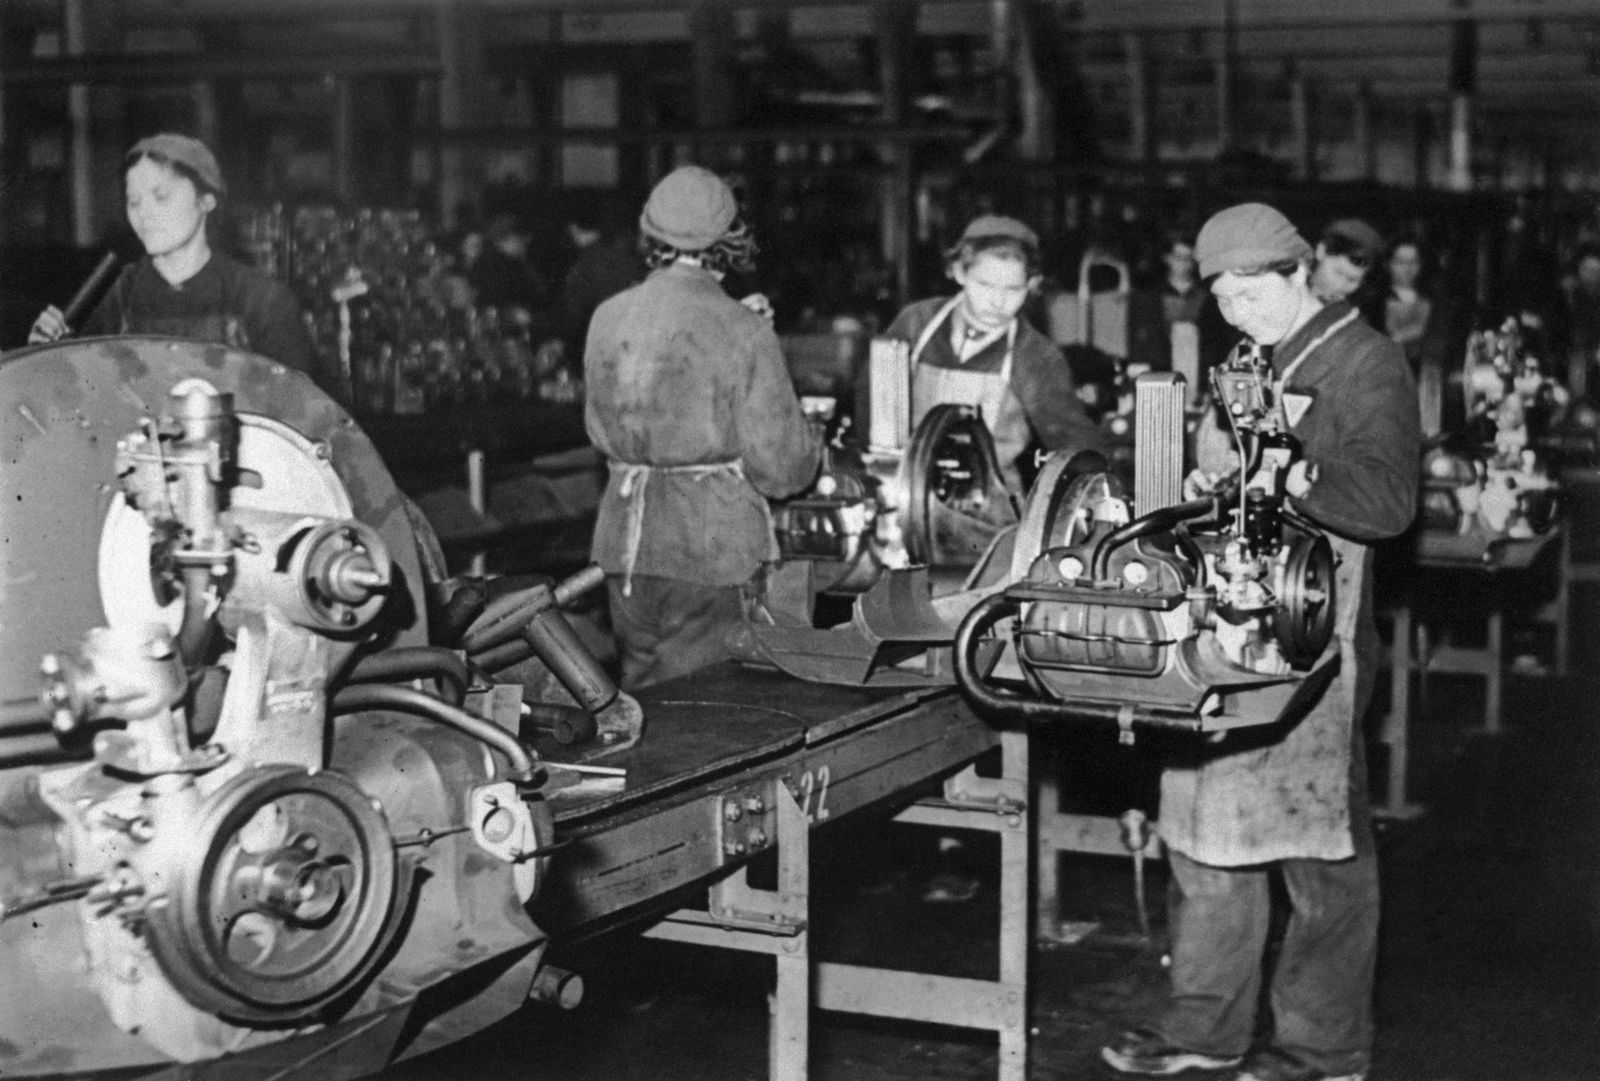 75 years ago: US troops liberate Volkswagen plant and city on Mittellandkanal